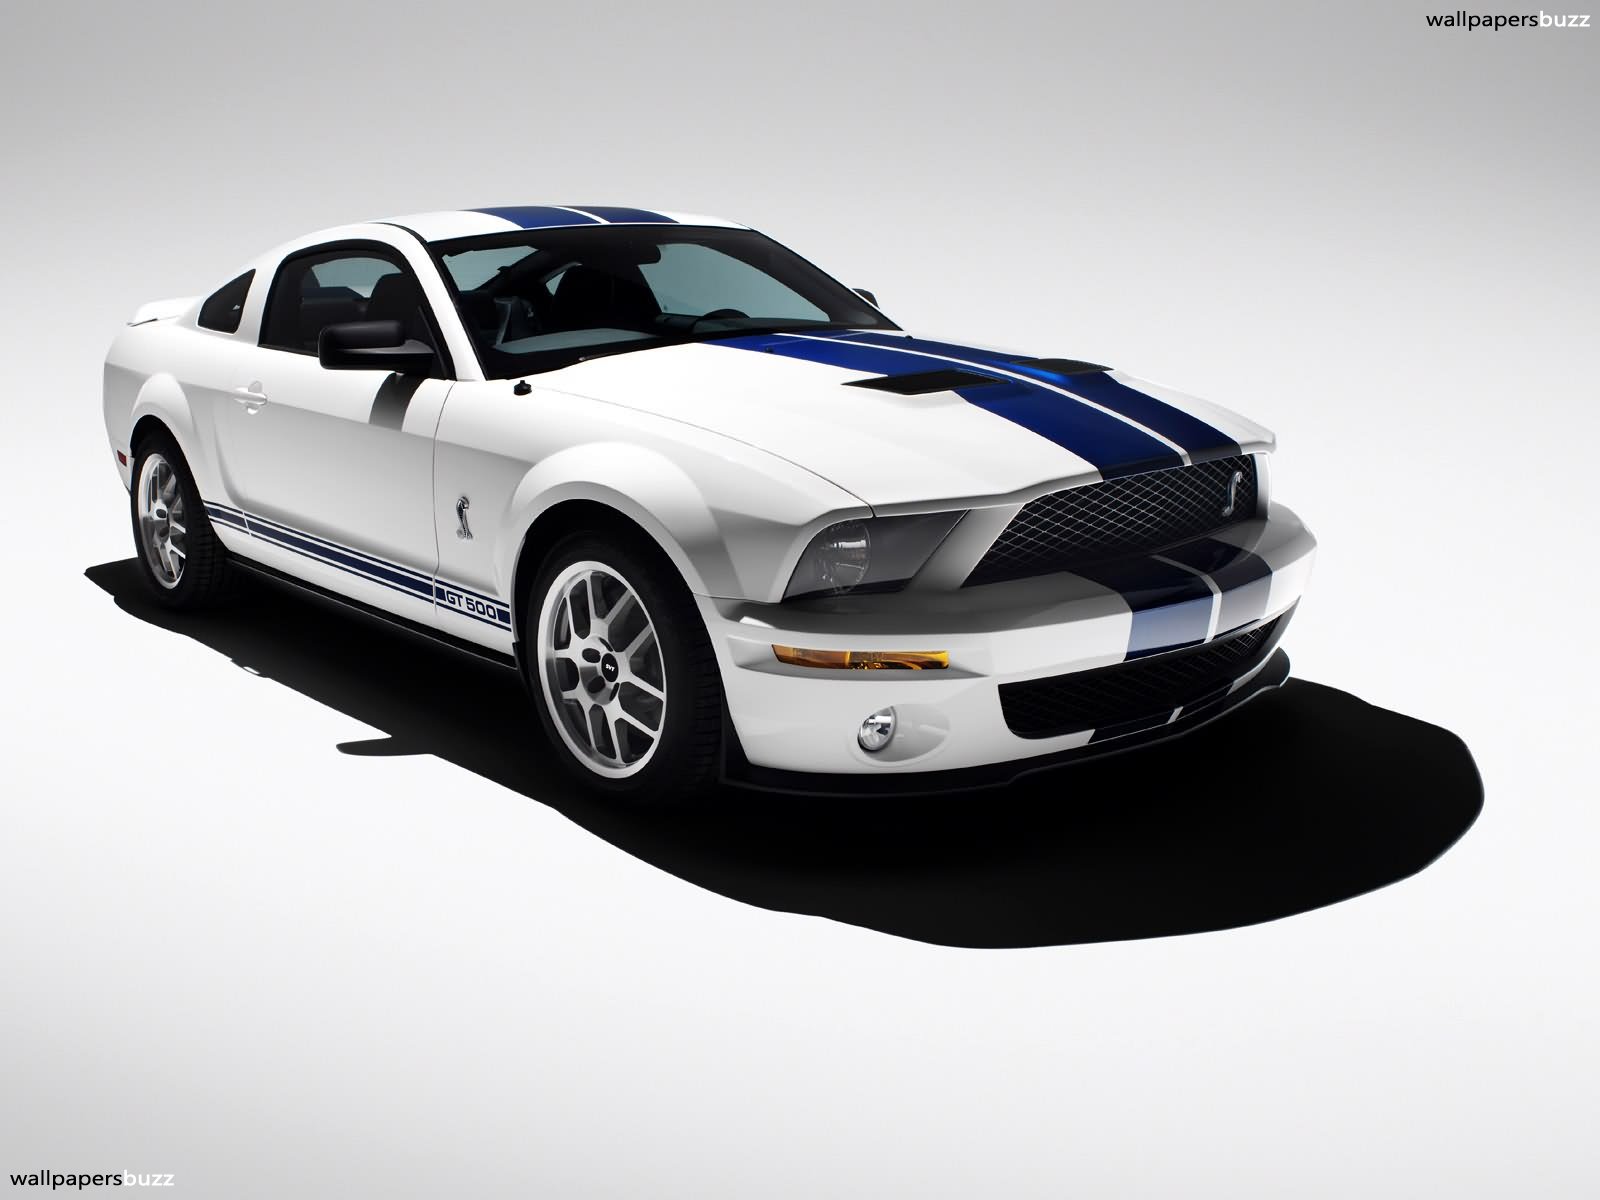 Ford Mustang Shelby Gt500 Car And Electronic Wallpaper